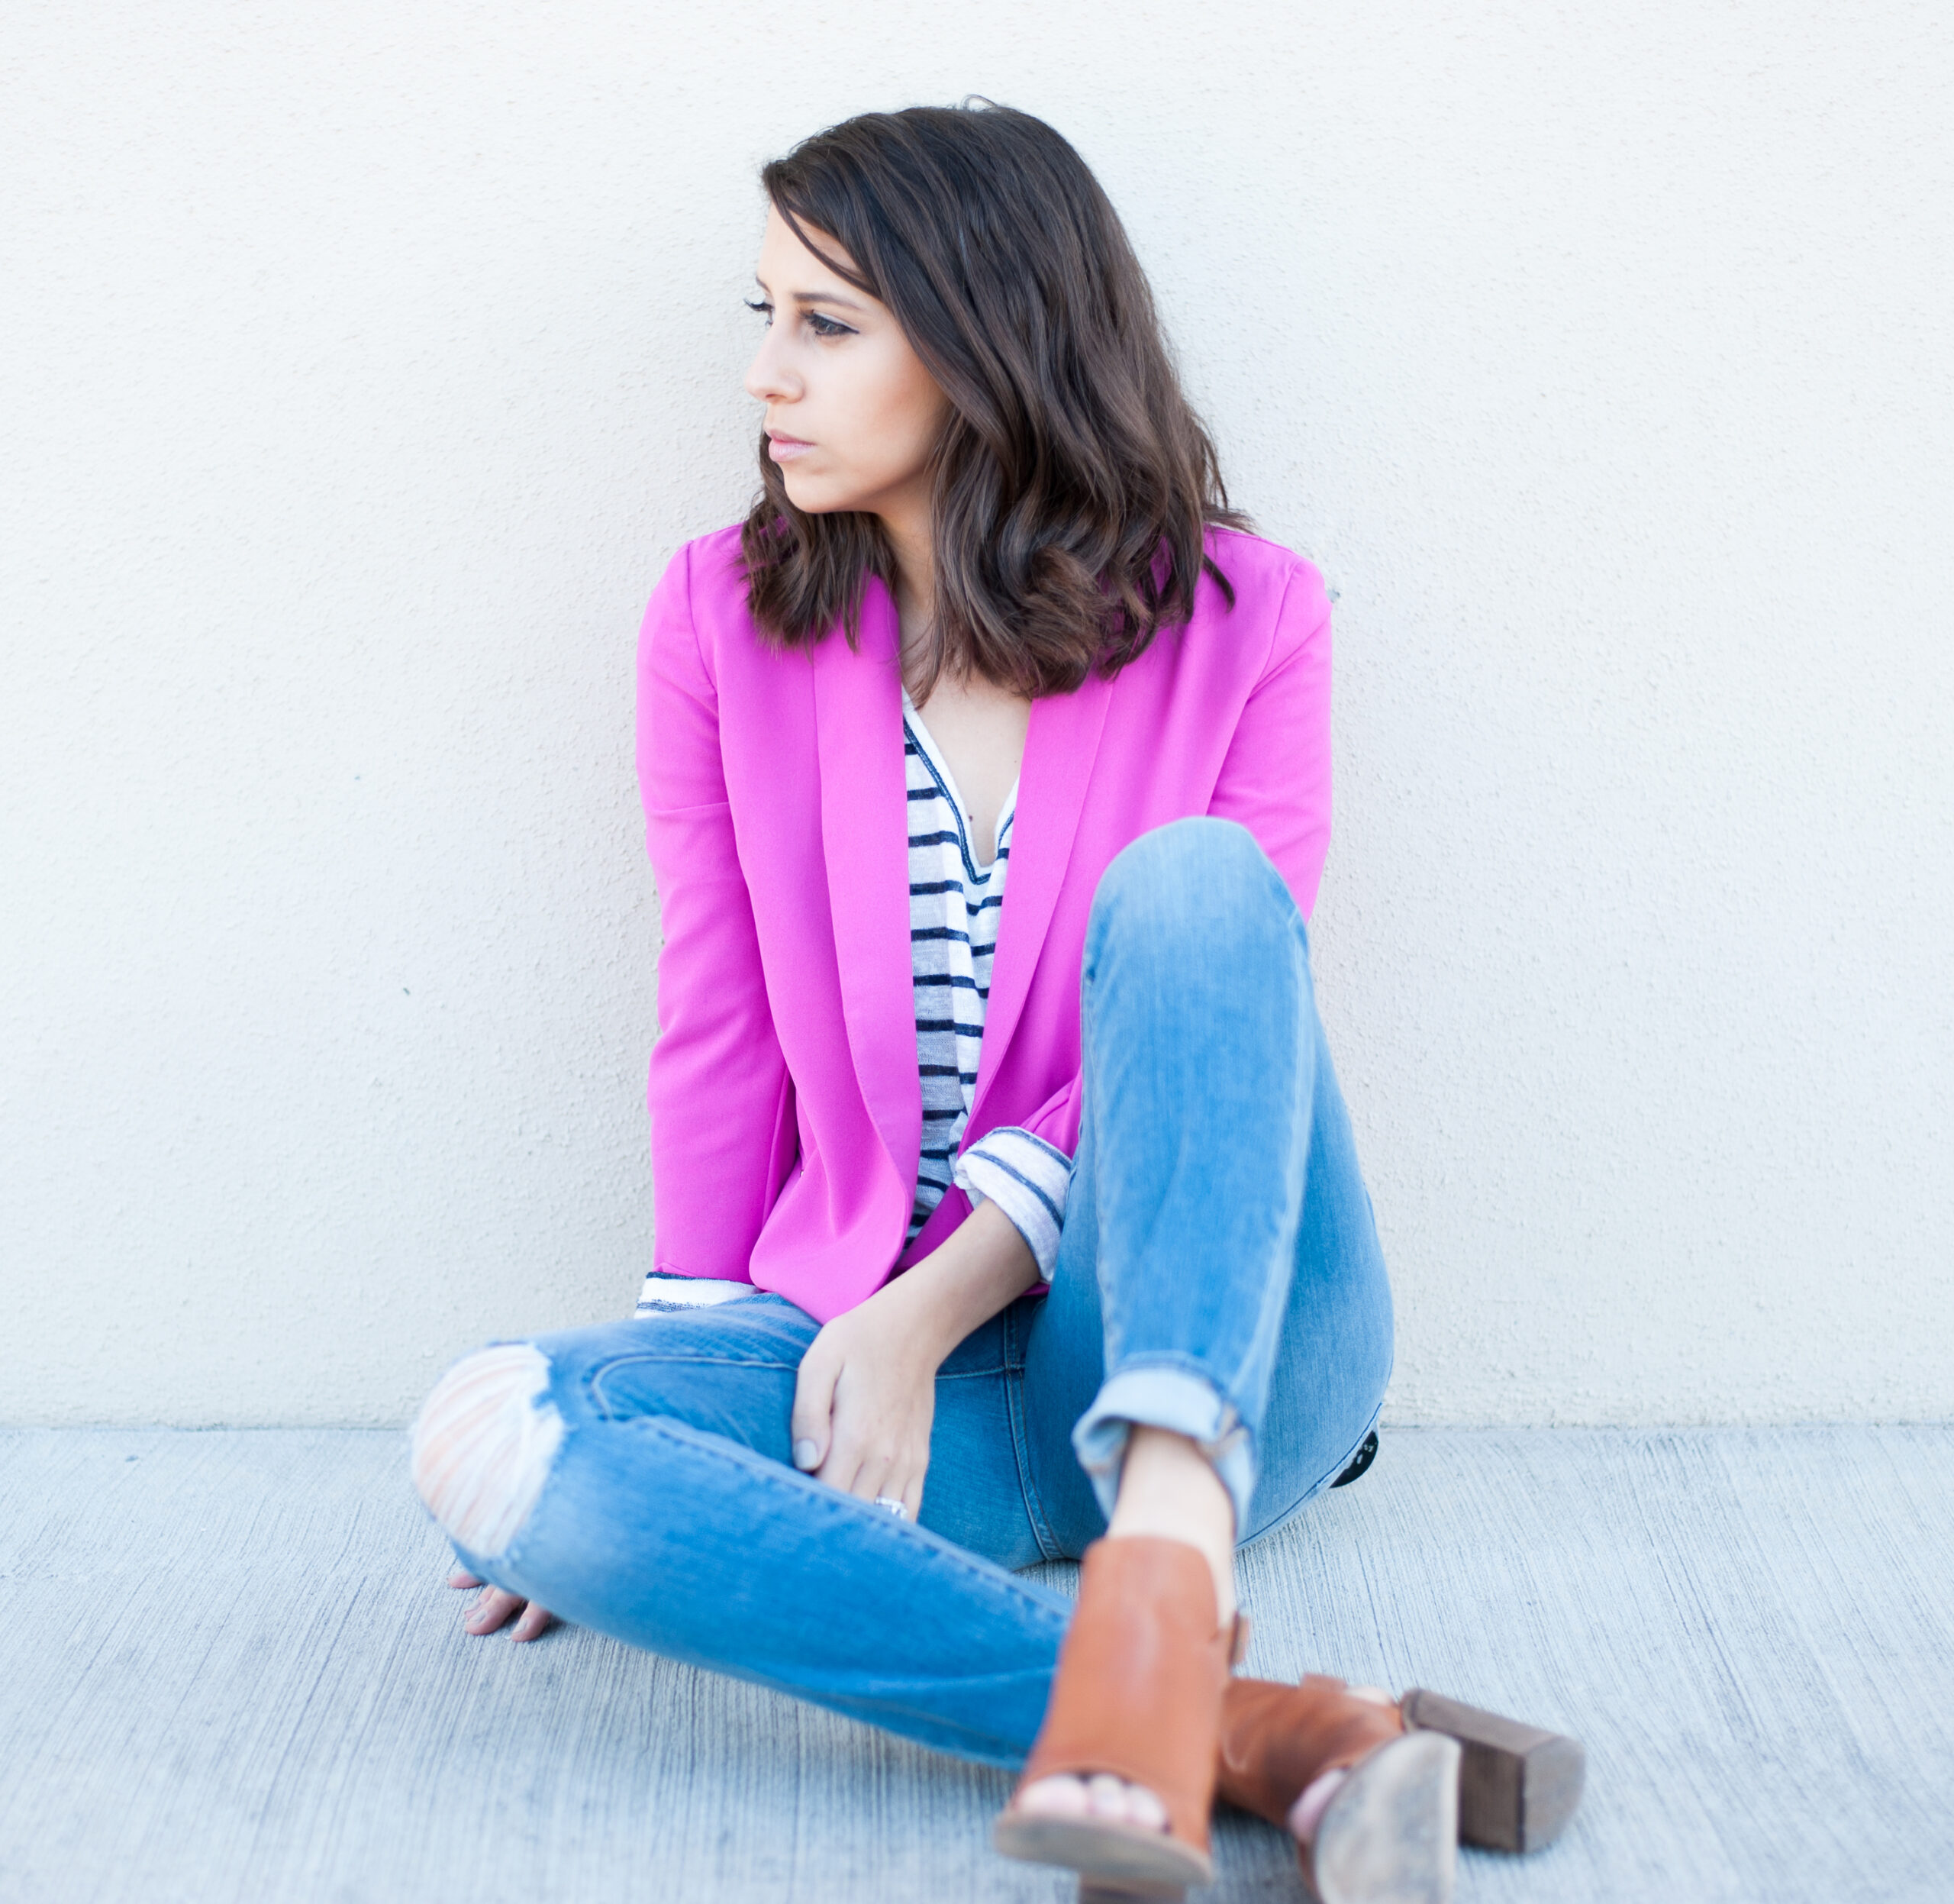 Dress Up Buttercup | Houston Fashion Blog - Dede Raad Pink Blazer Casual Look